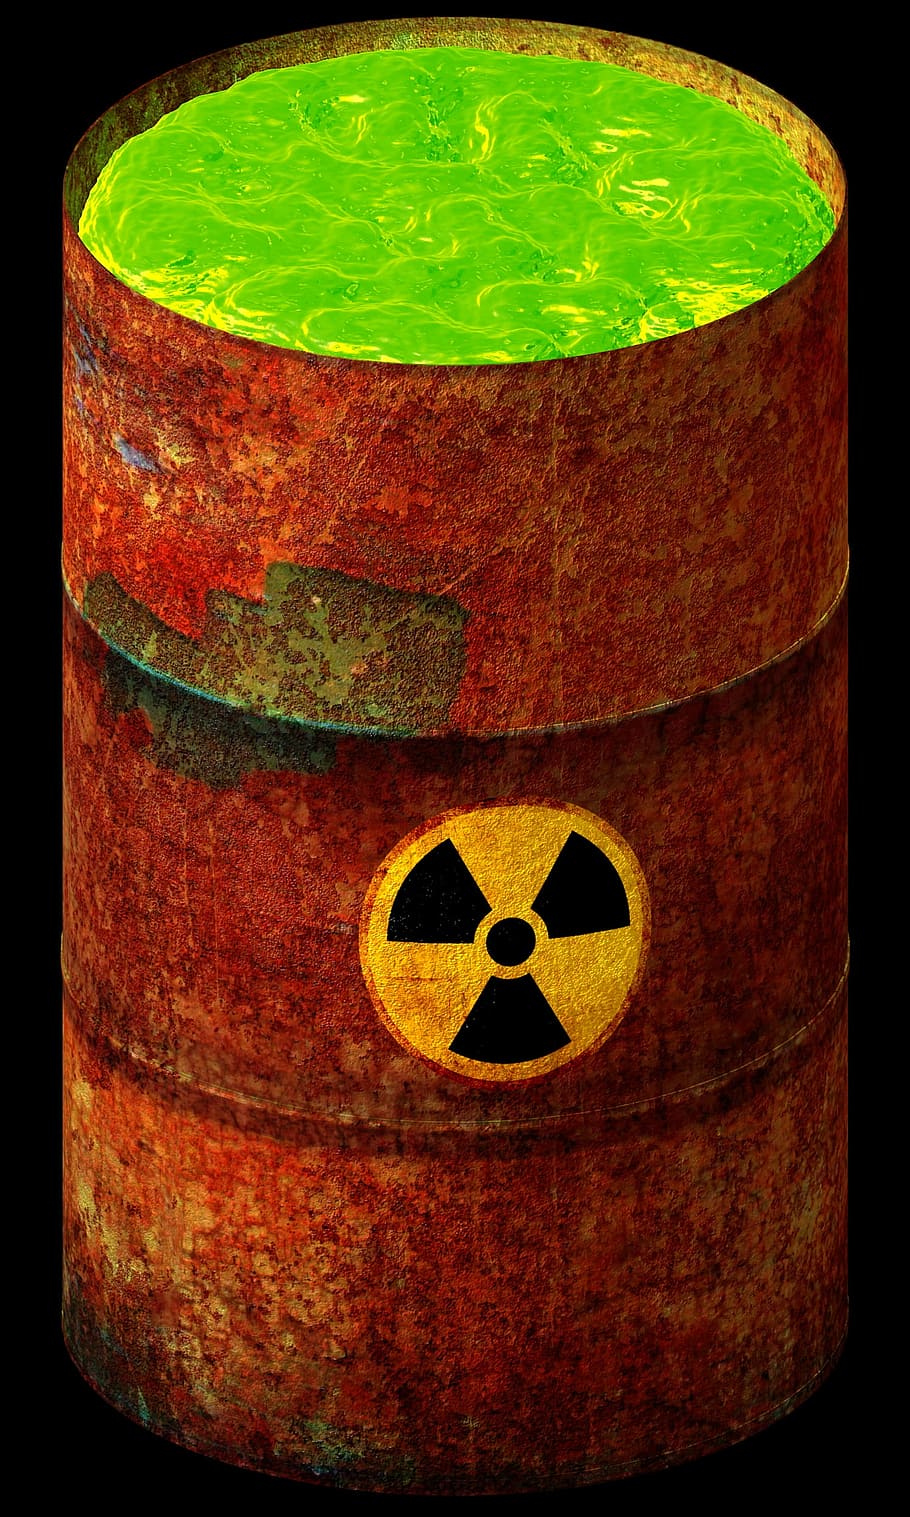 rusty brown drum, nuclear, waste, radioactive, toxic, danger